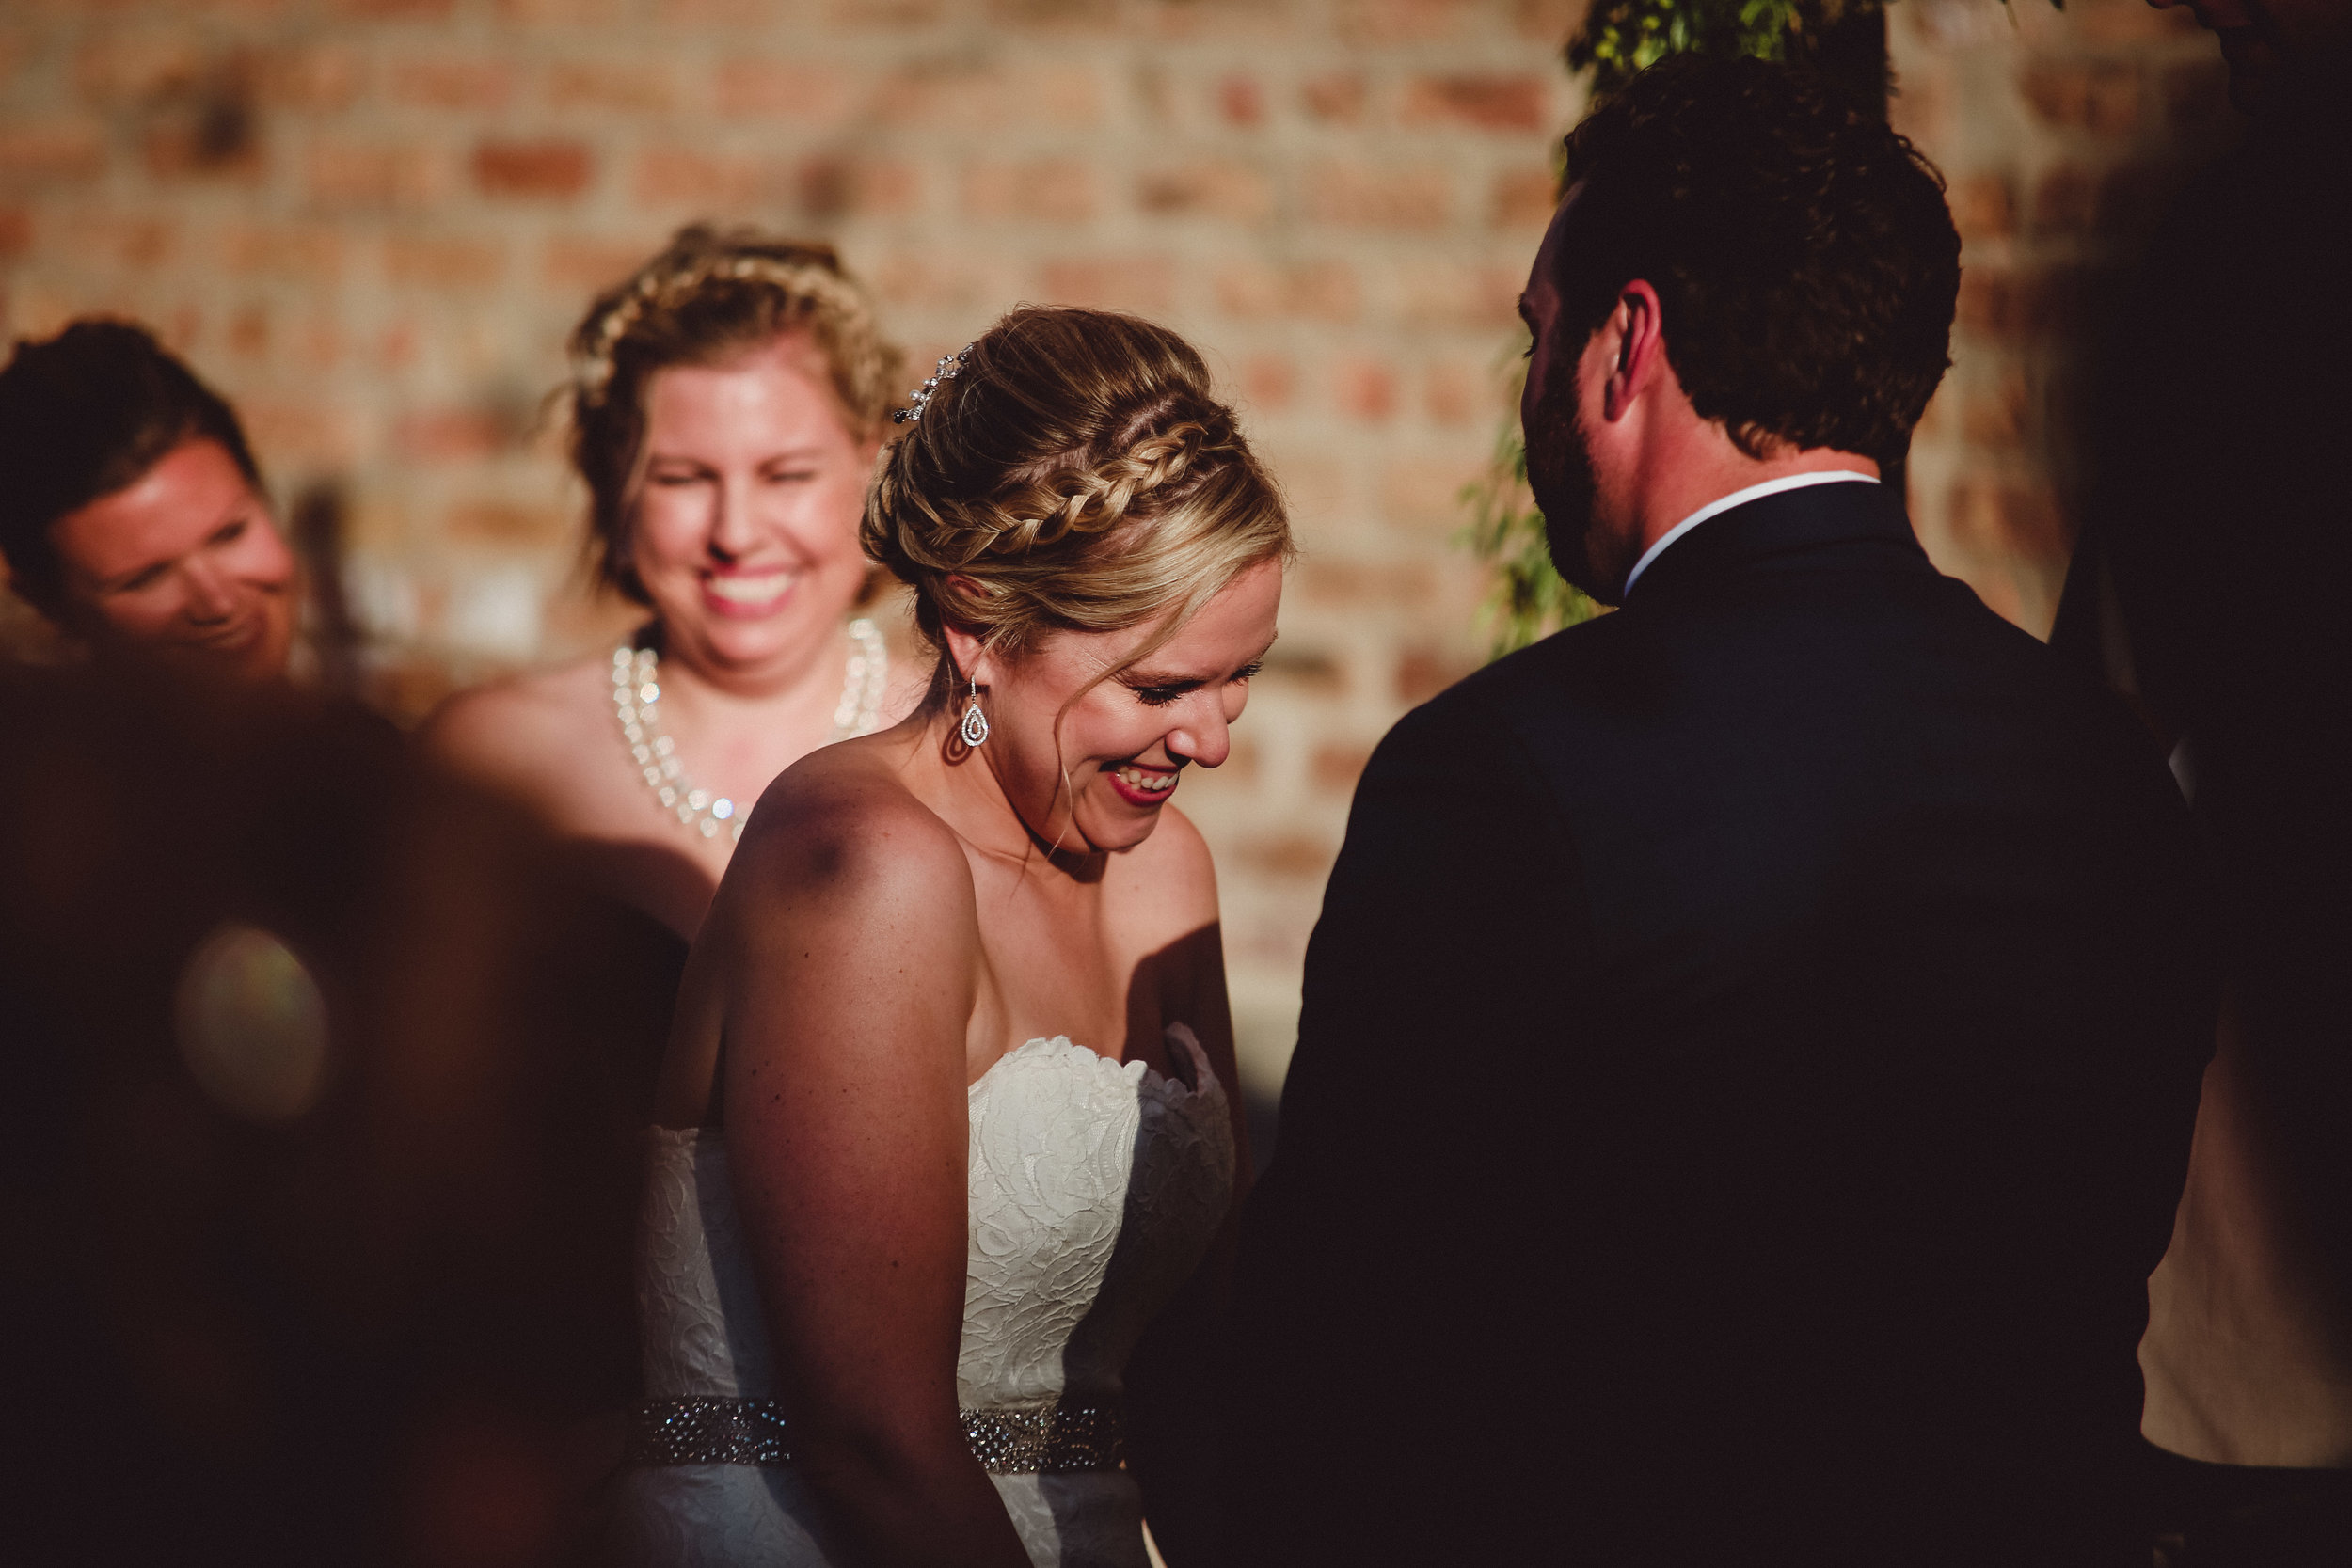 joy in the shadows of vows 